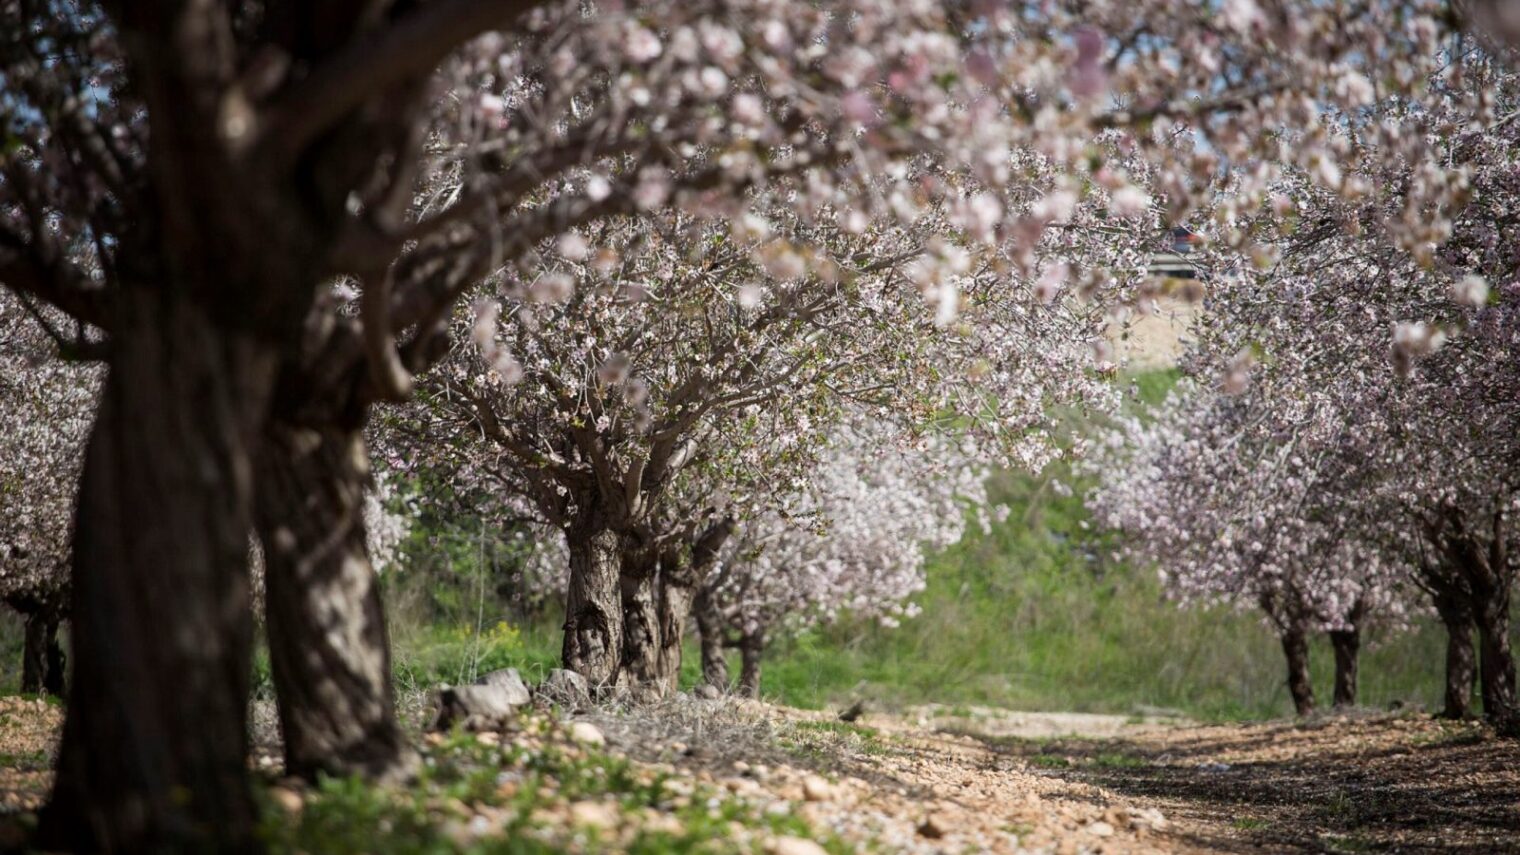 A field of blossoming almond trees in Latrun. Photo by Hadas Parush/Flash90